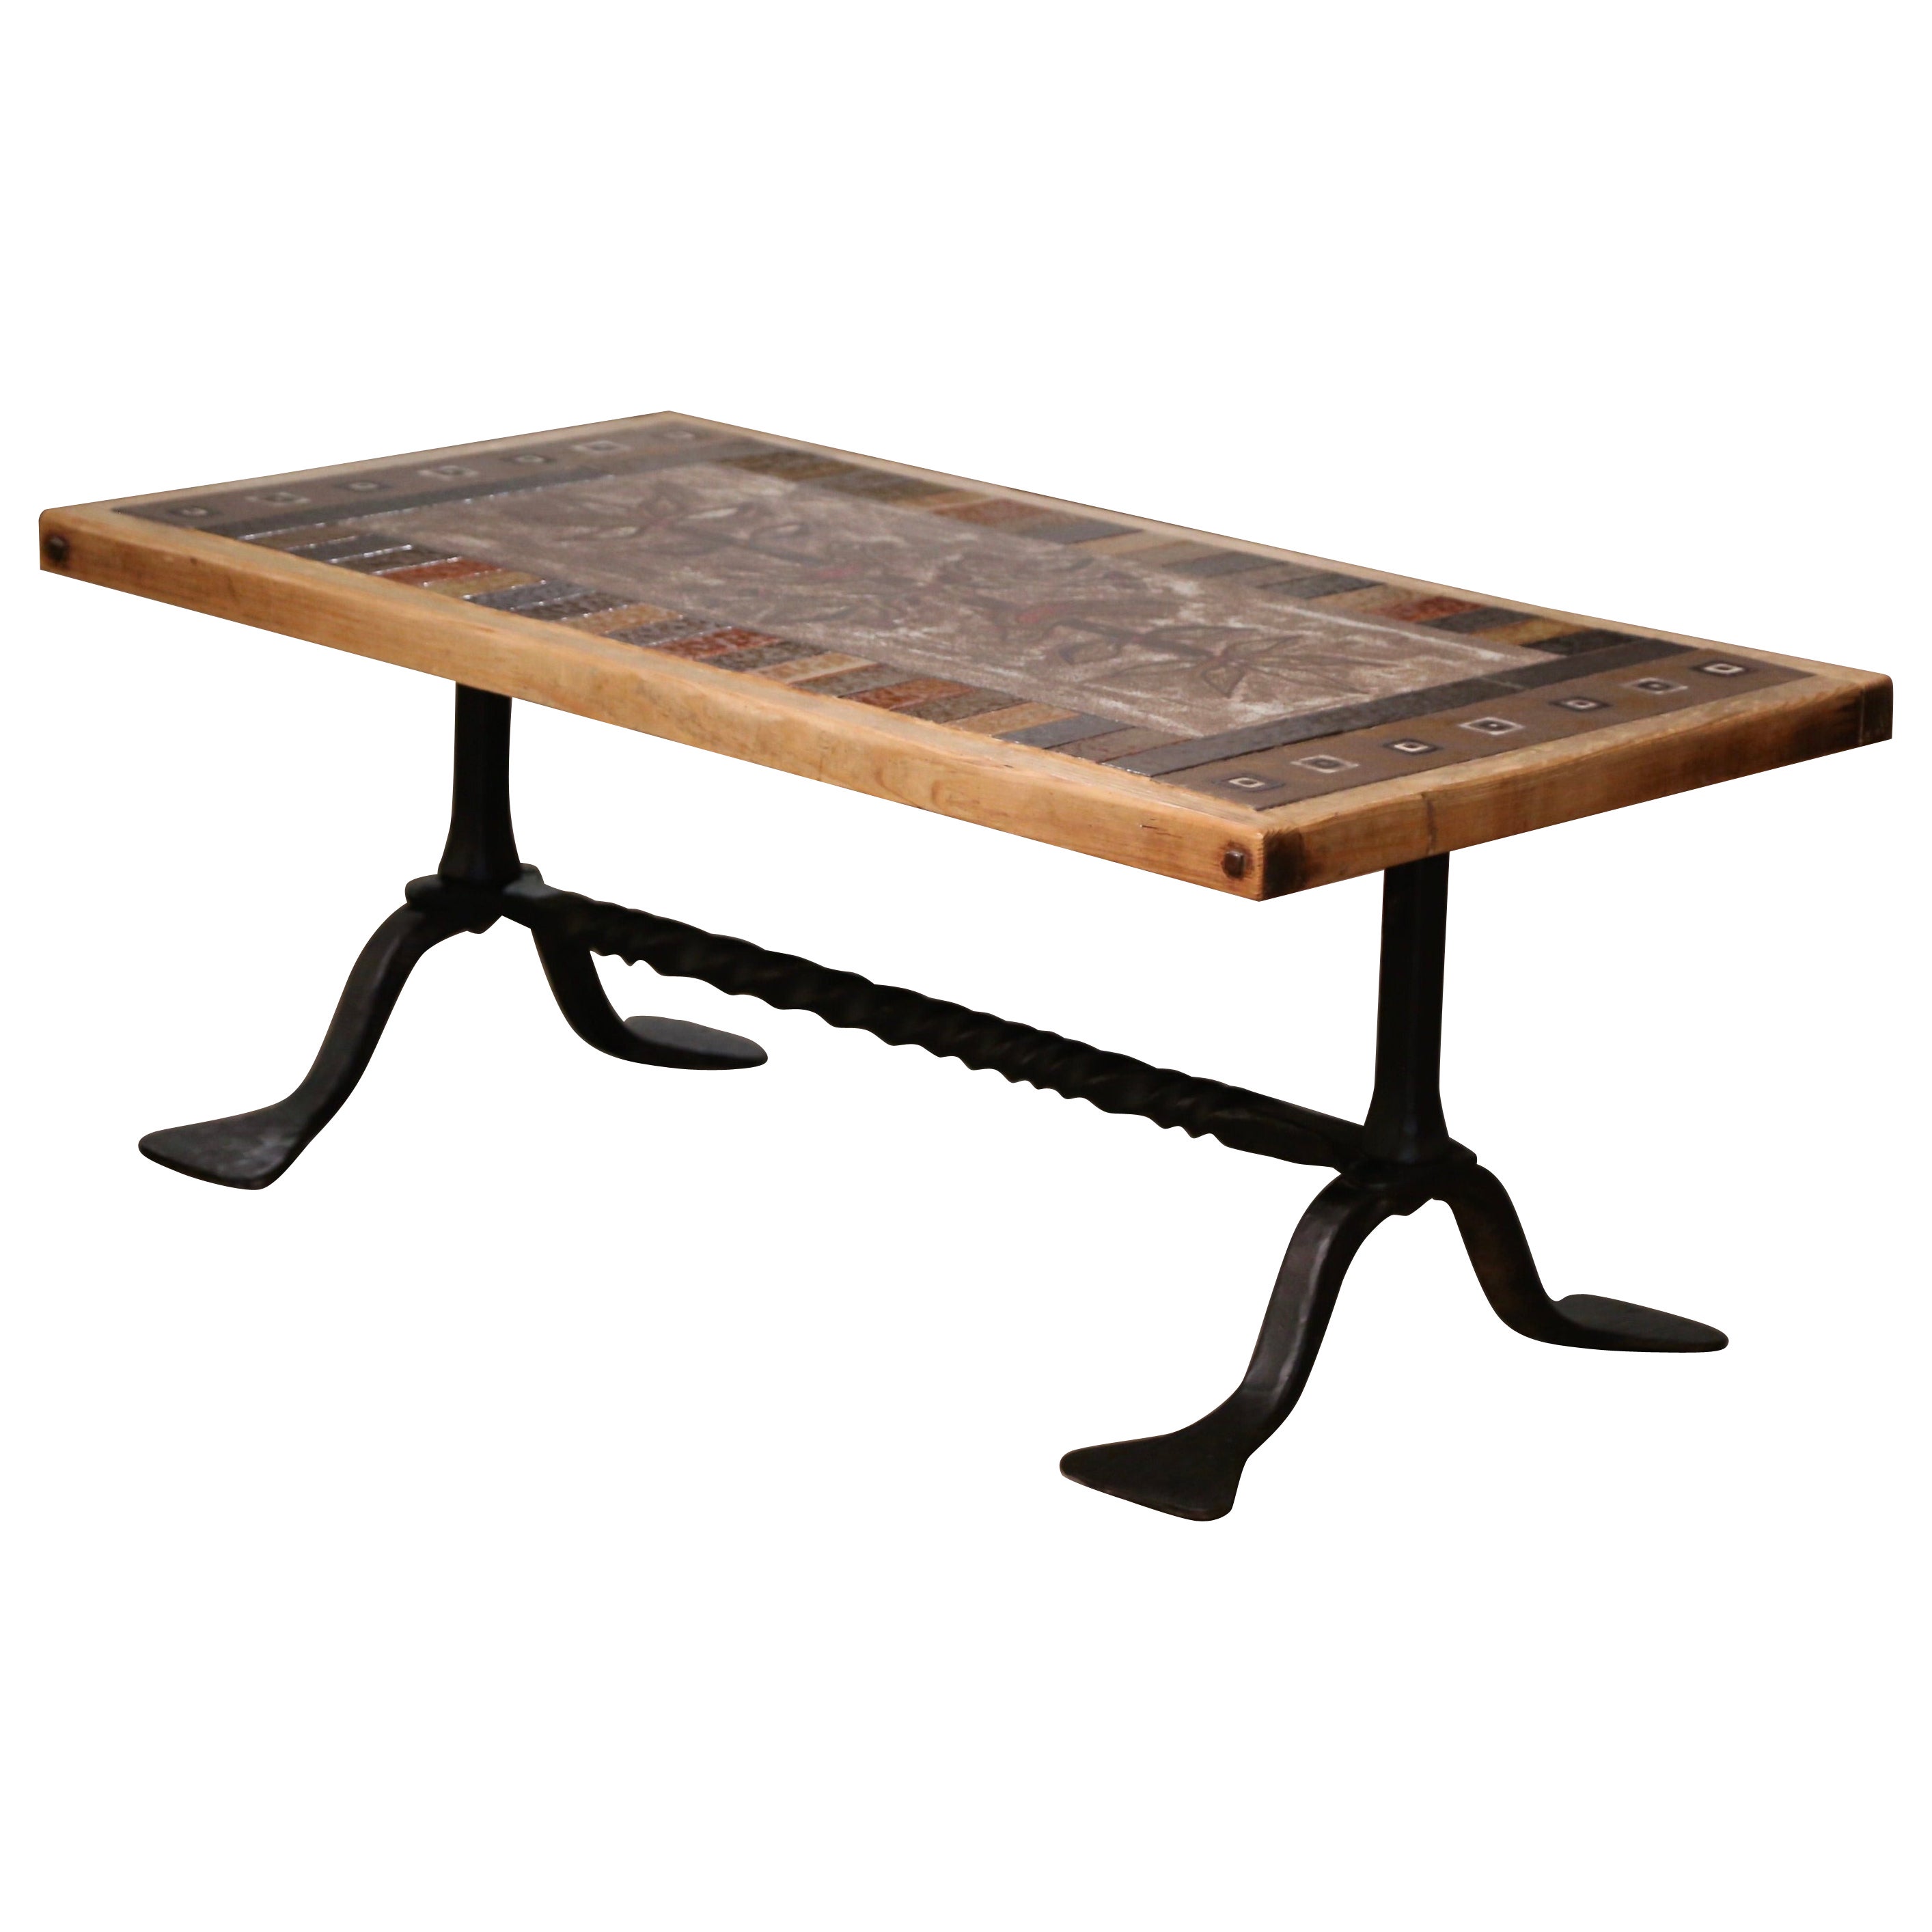 Mid-Century French Oak Ceramic and Wrought Iron Coffee Table Signed J.G. Picard